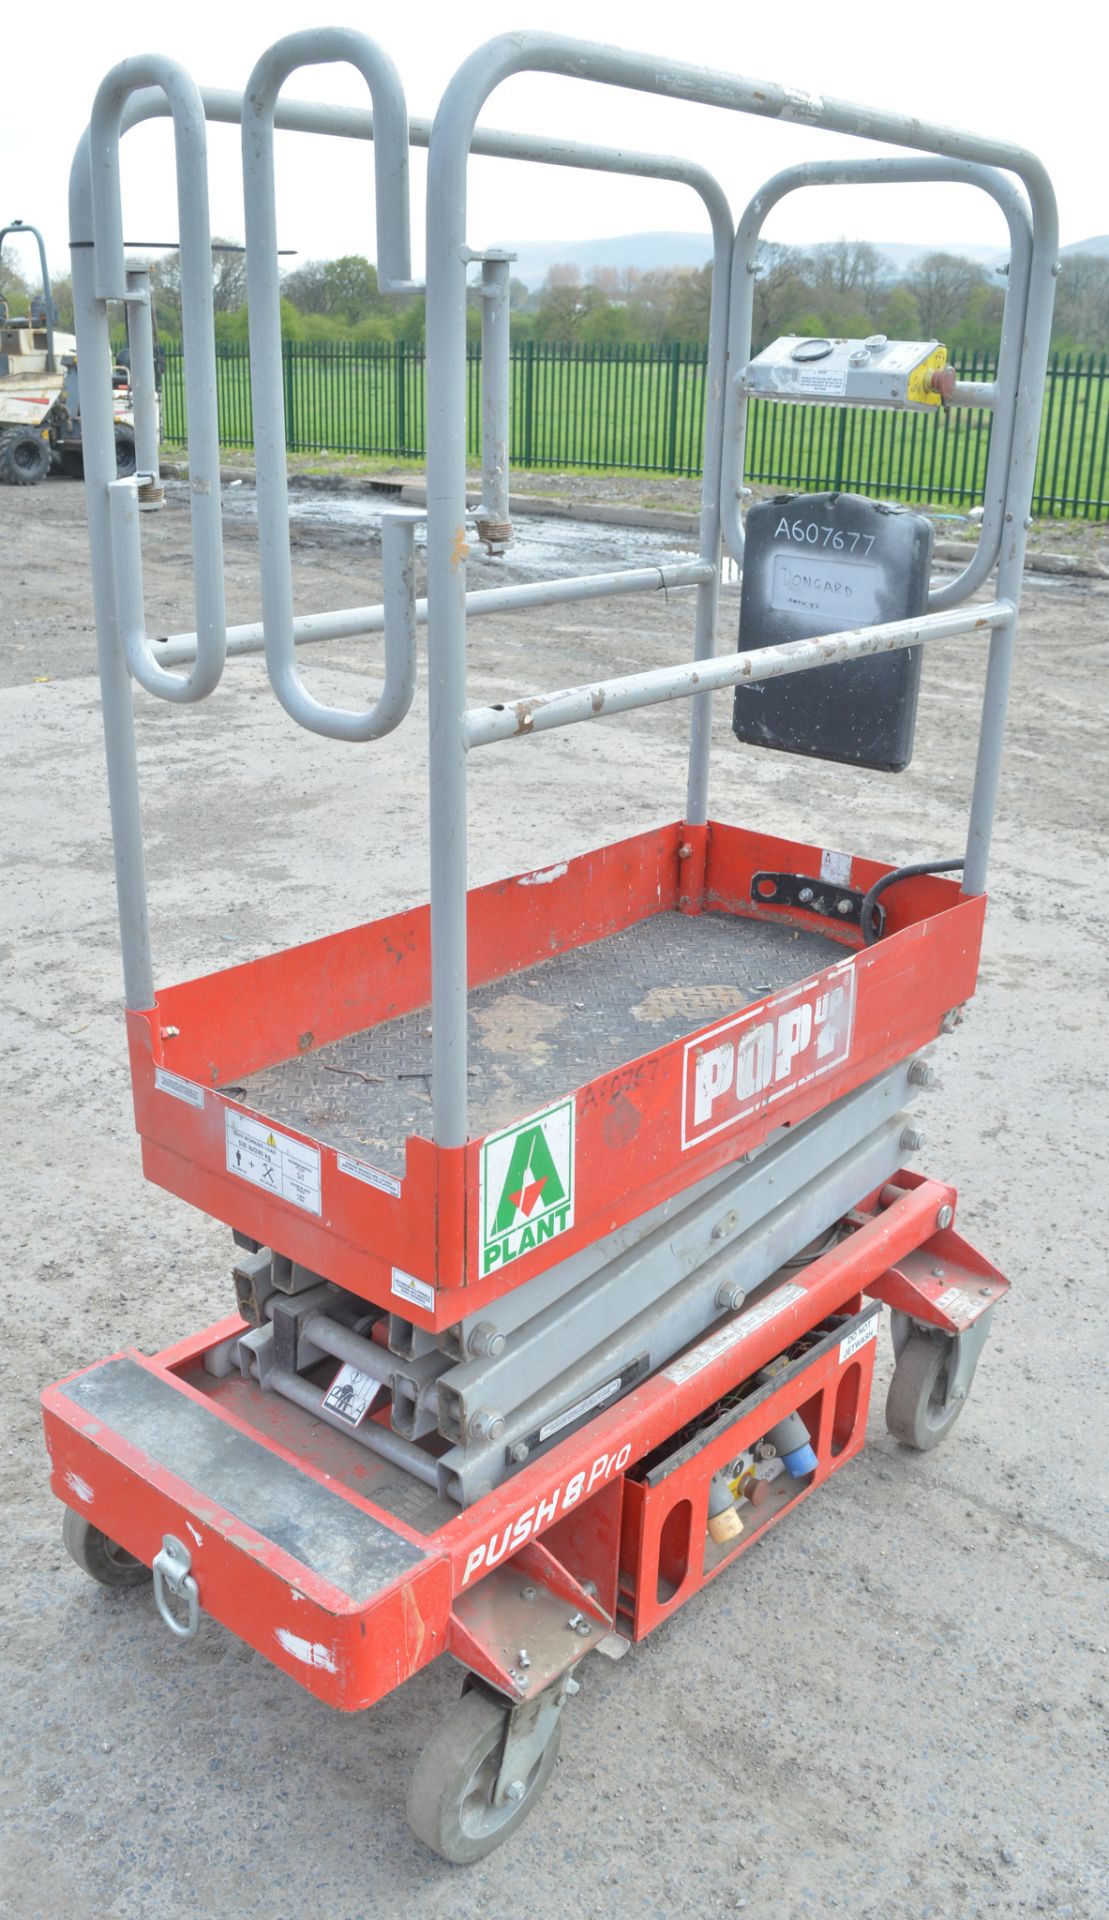 Pop Up Push 8 Pro battery electric scissor lift access platform  Year:  S/N:  A607677 - Image 2 of 2